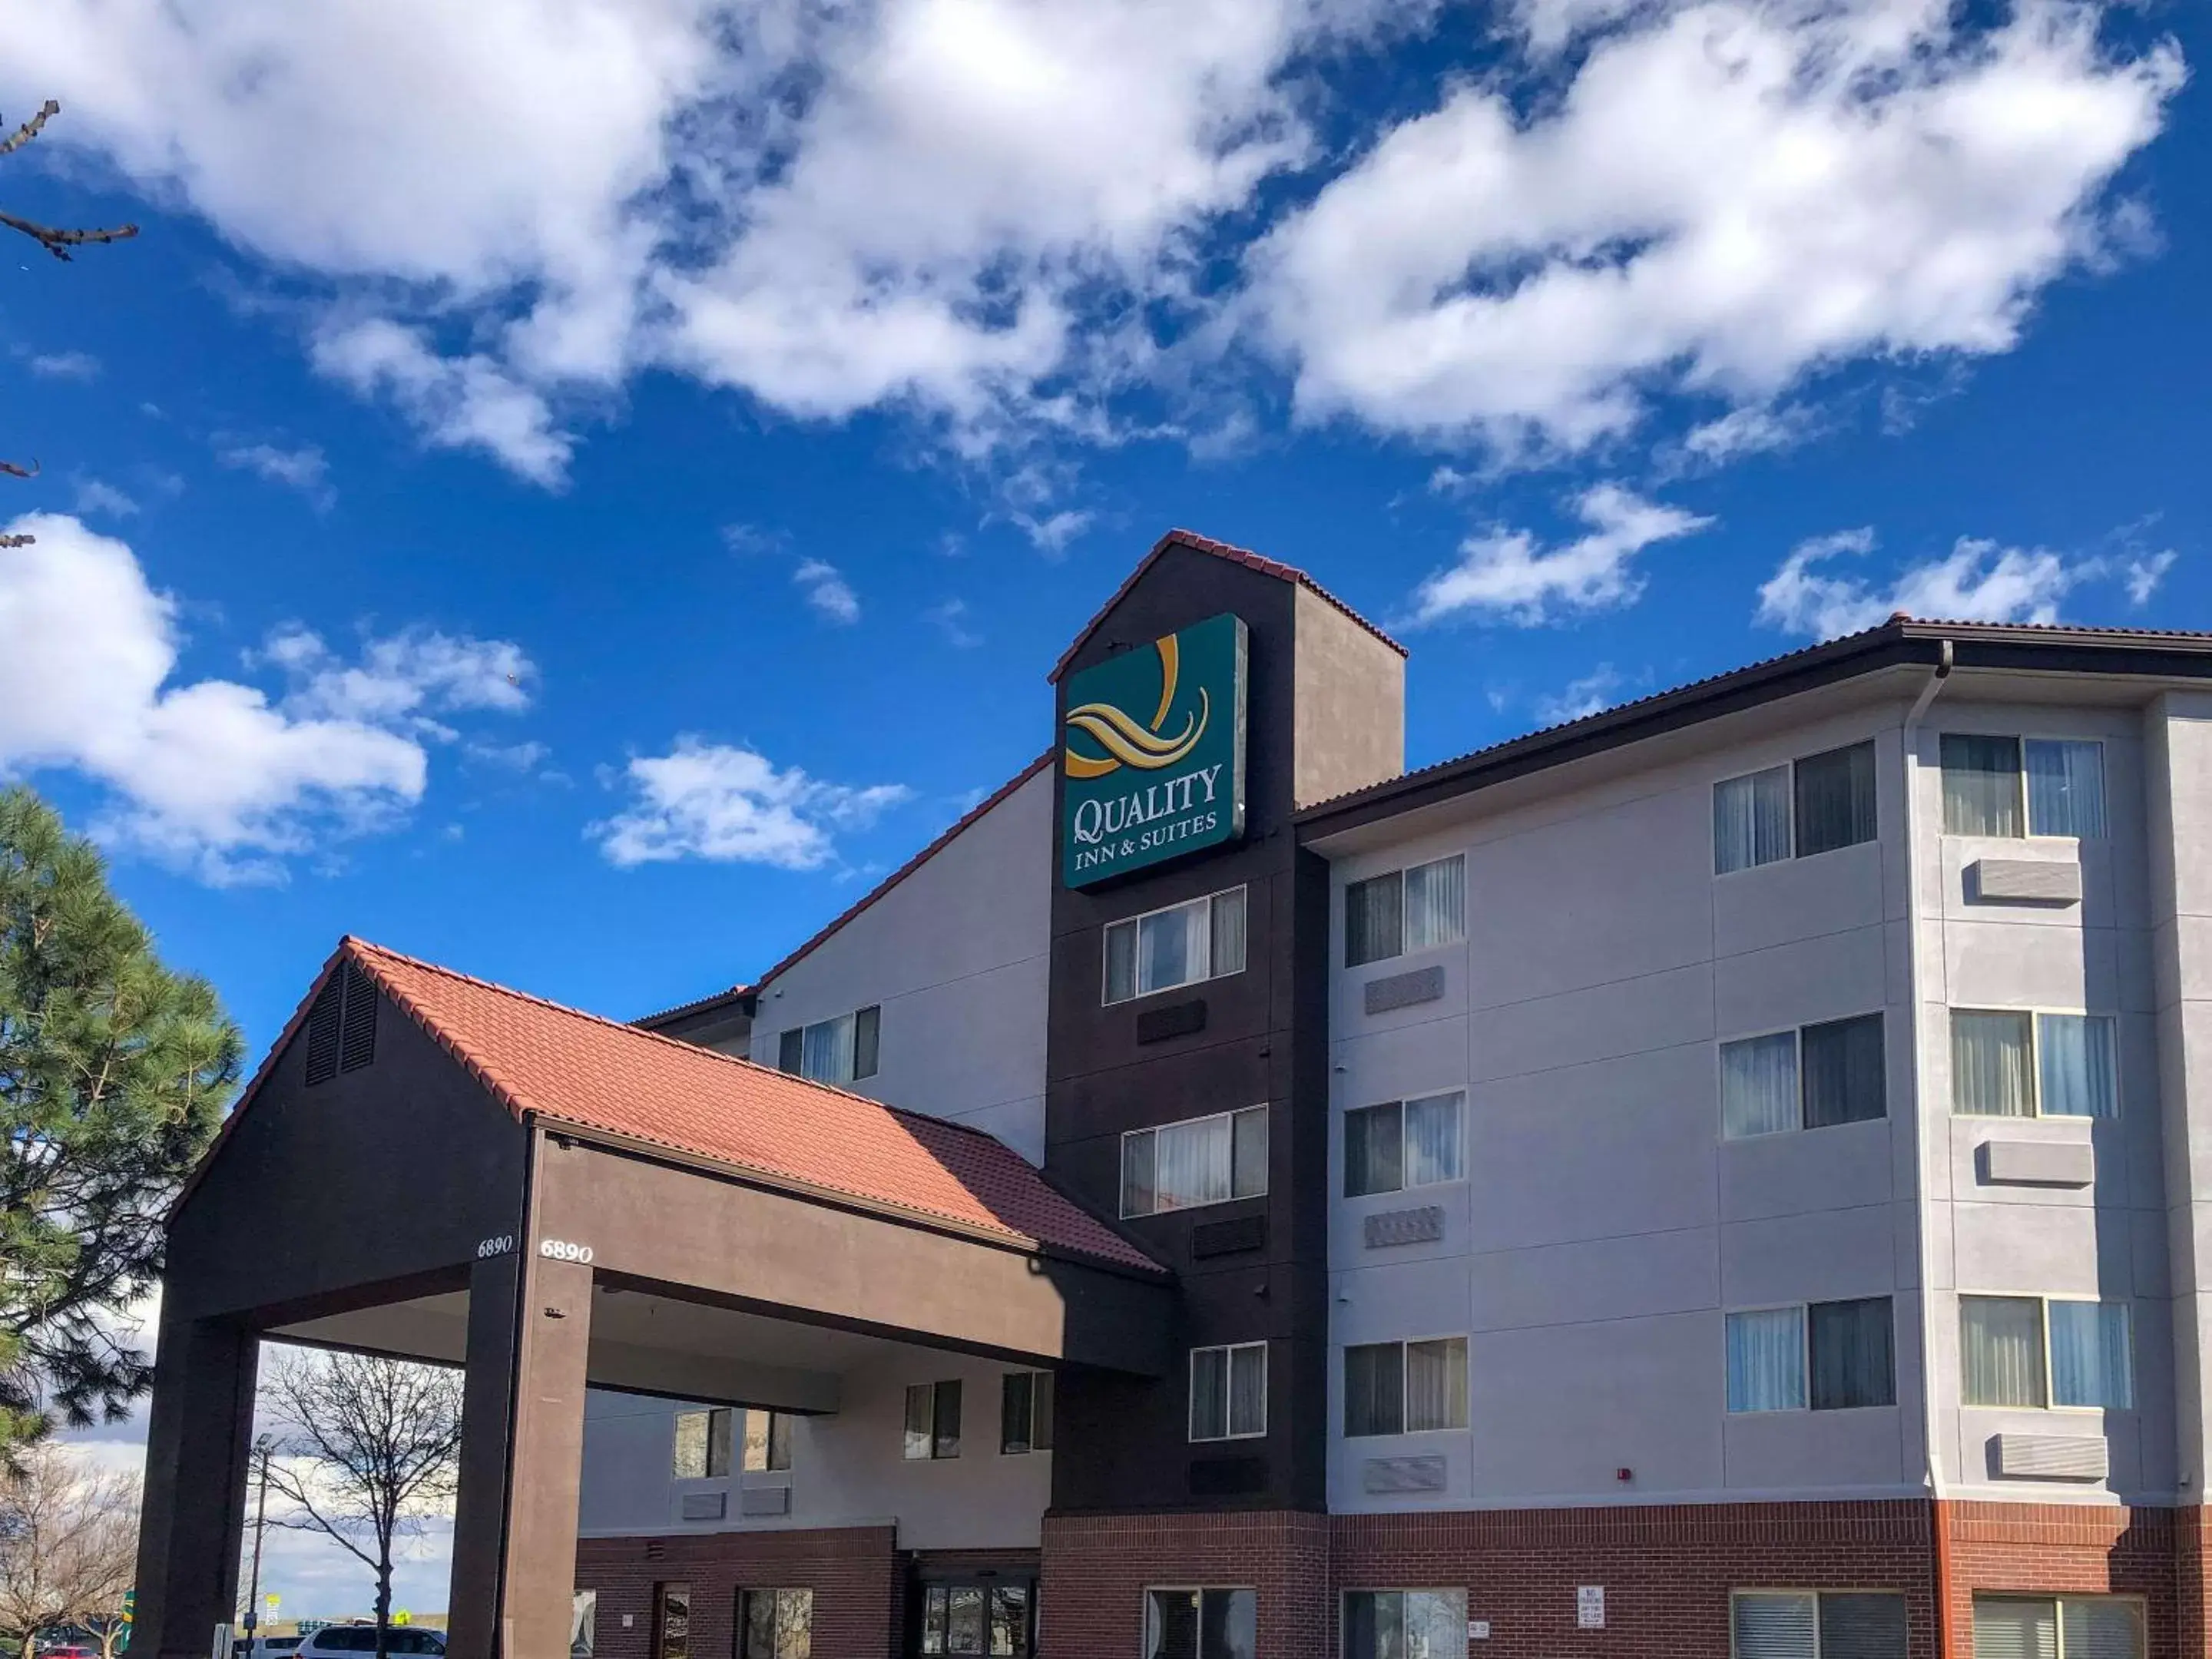 Property Building in Quality Inn & Suites Denver International Airport